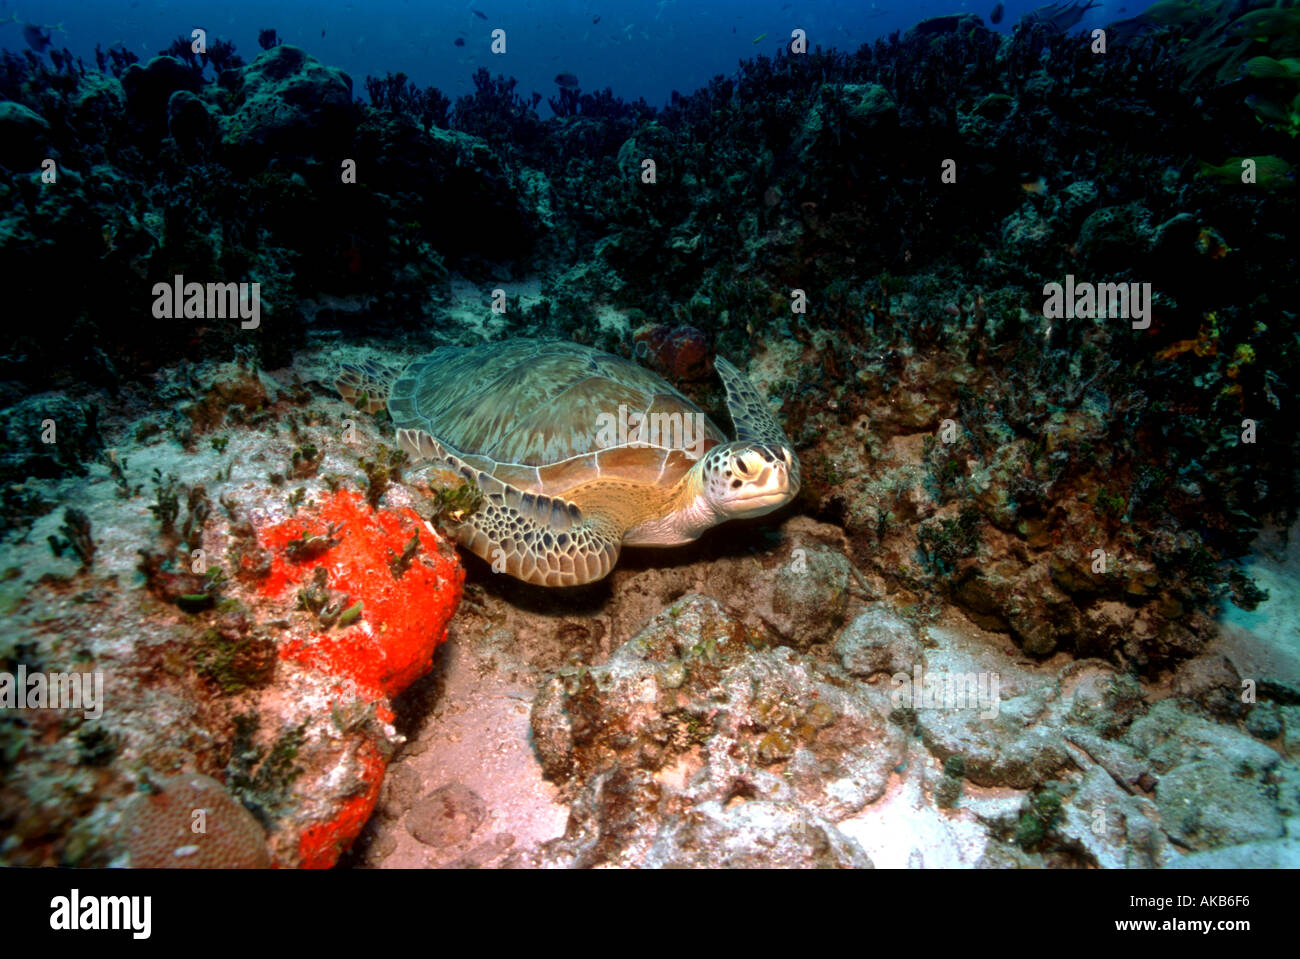 A Caribbean green sea turtle rests on the coal reef at a dive site in Bimini Bahamas Stock Photo